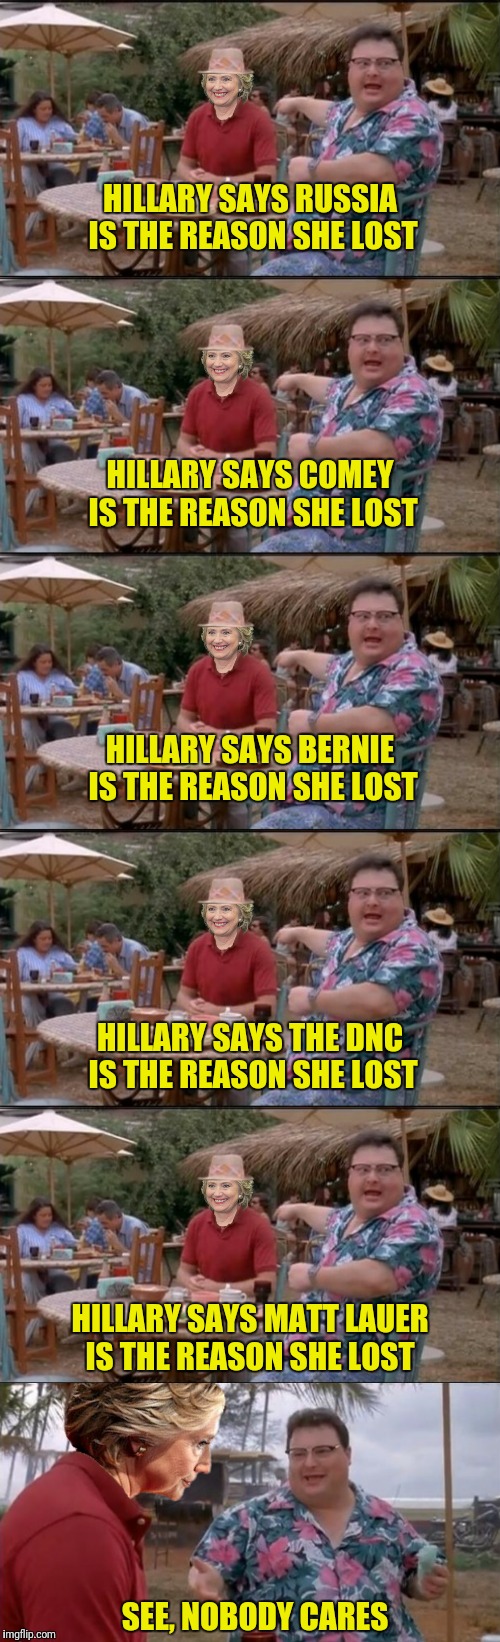 Please note:  the unedited version of this meme did not fit on imgflip.  Please feel free to add excuses. | HILLARY SAYS RUSSIA IS THE REASON SHE LOST; HILLARY SAYS COMEY IS THE REASON SHE LOST; HILLARY SAYS BERNIE IS THE REASON SHE LOST; HILLARY SAYS THE DNC IS THE REASON SHE LOST; HILLARY SAYS MATT LAUER IS THE REASON SHE LOST; SEE, NOBODY CARES | image tagged in hillary clinton,russia,jim comey,bernie sanders,dnc,matt lauer | made w/ Imgflip meme maker